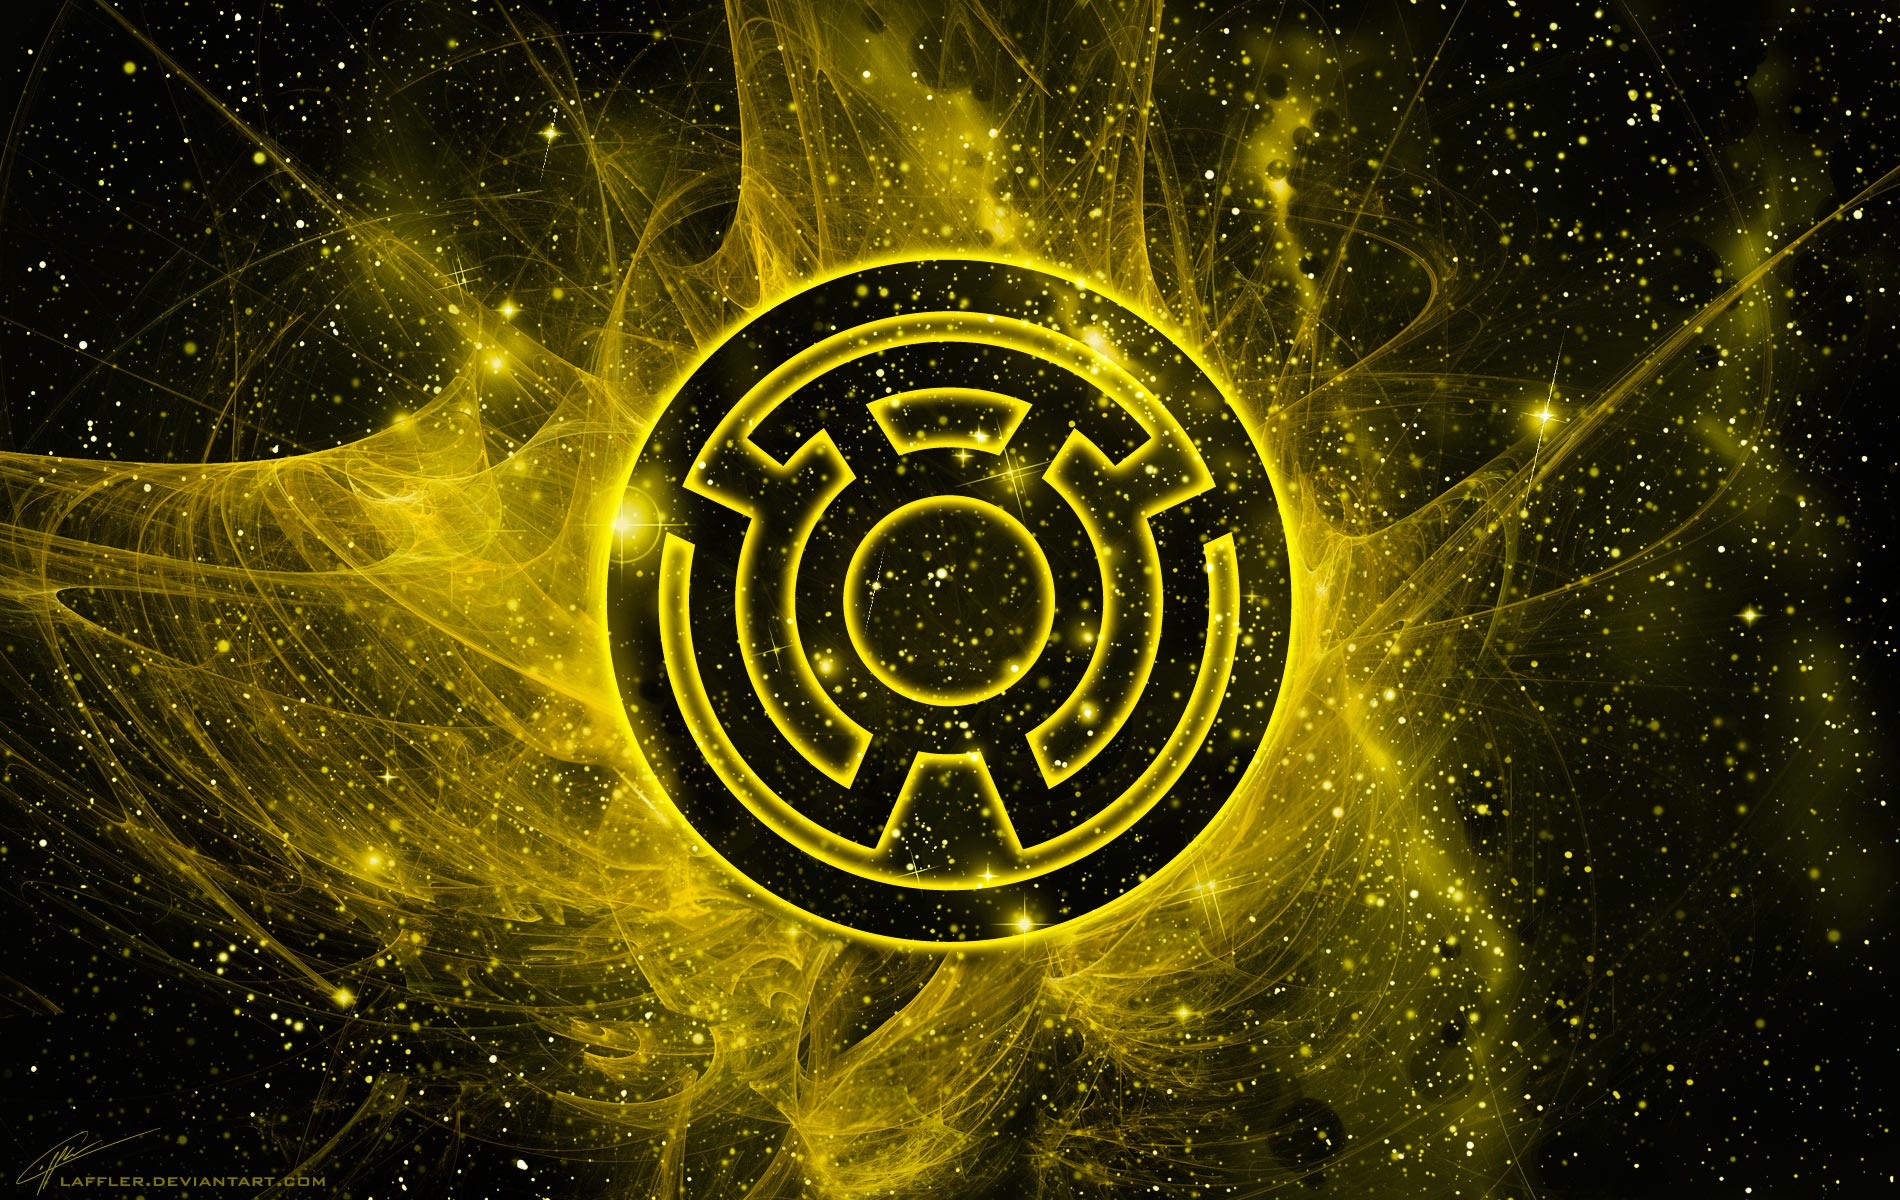 Sinestro Corps Wallpapers by Laffler on